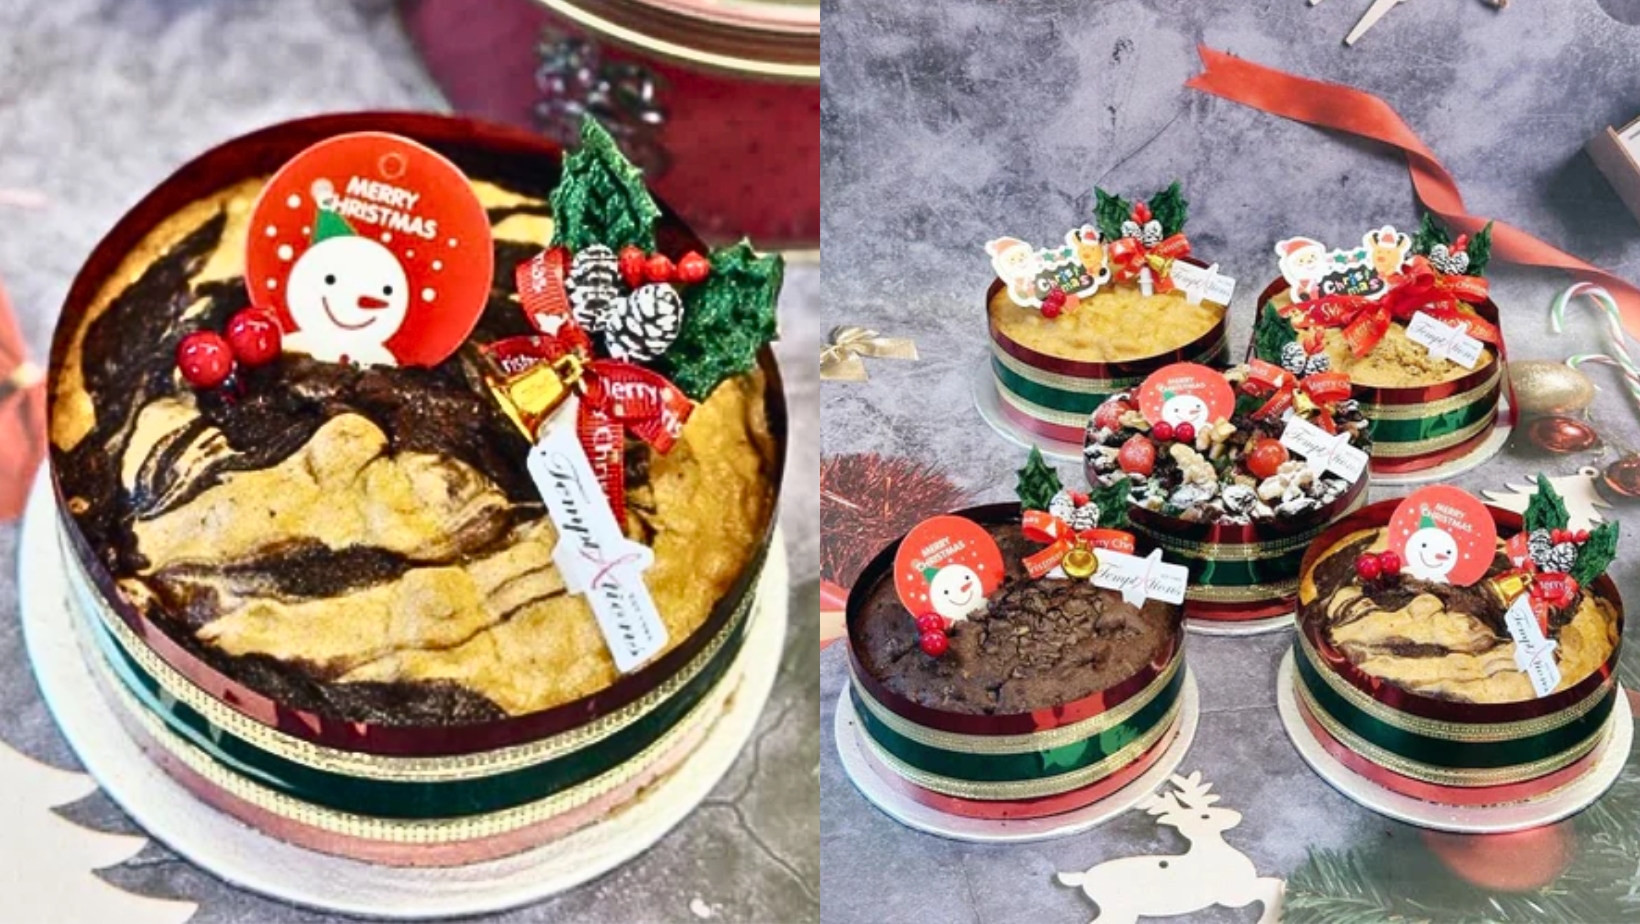 Discover The Delectable Christmas Cakes From Cakes Temptations